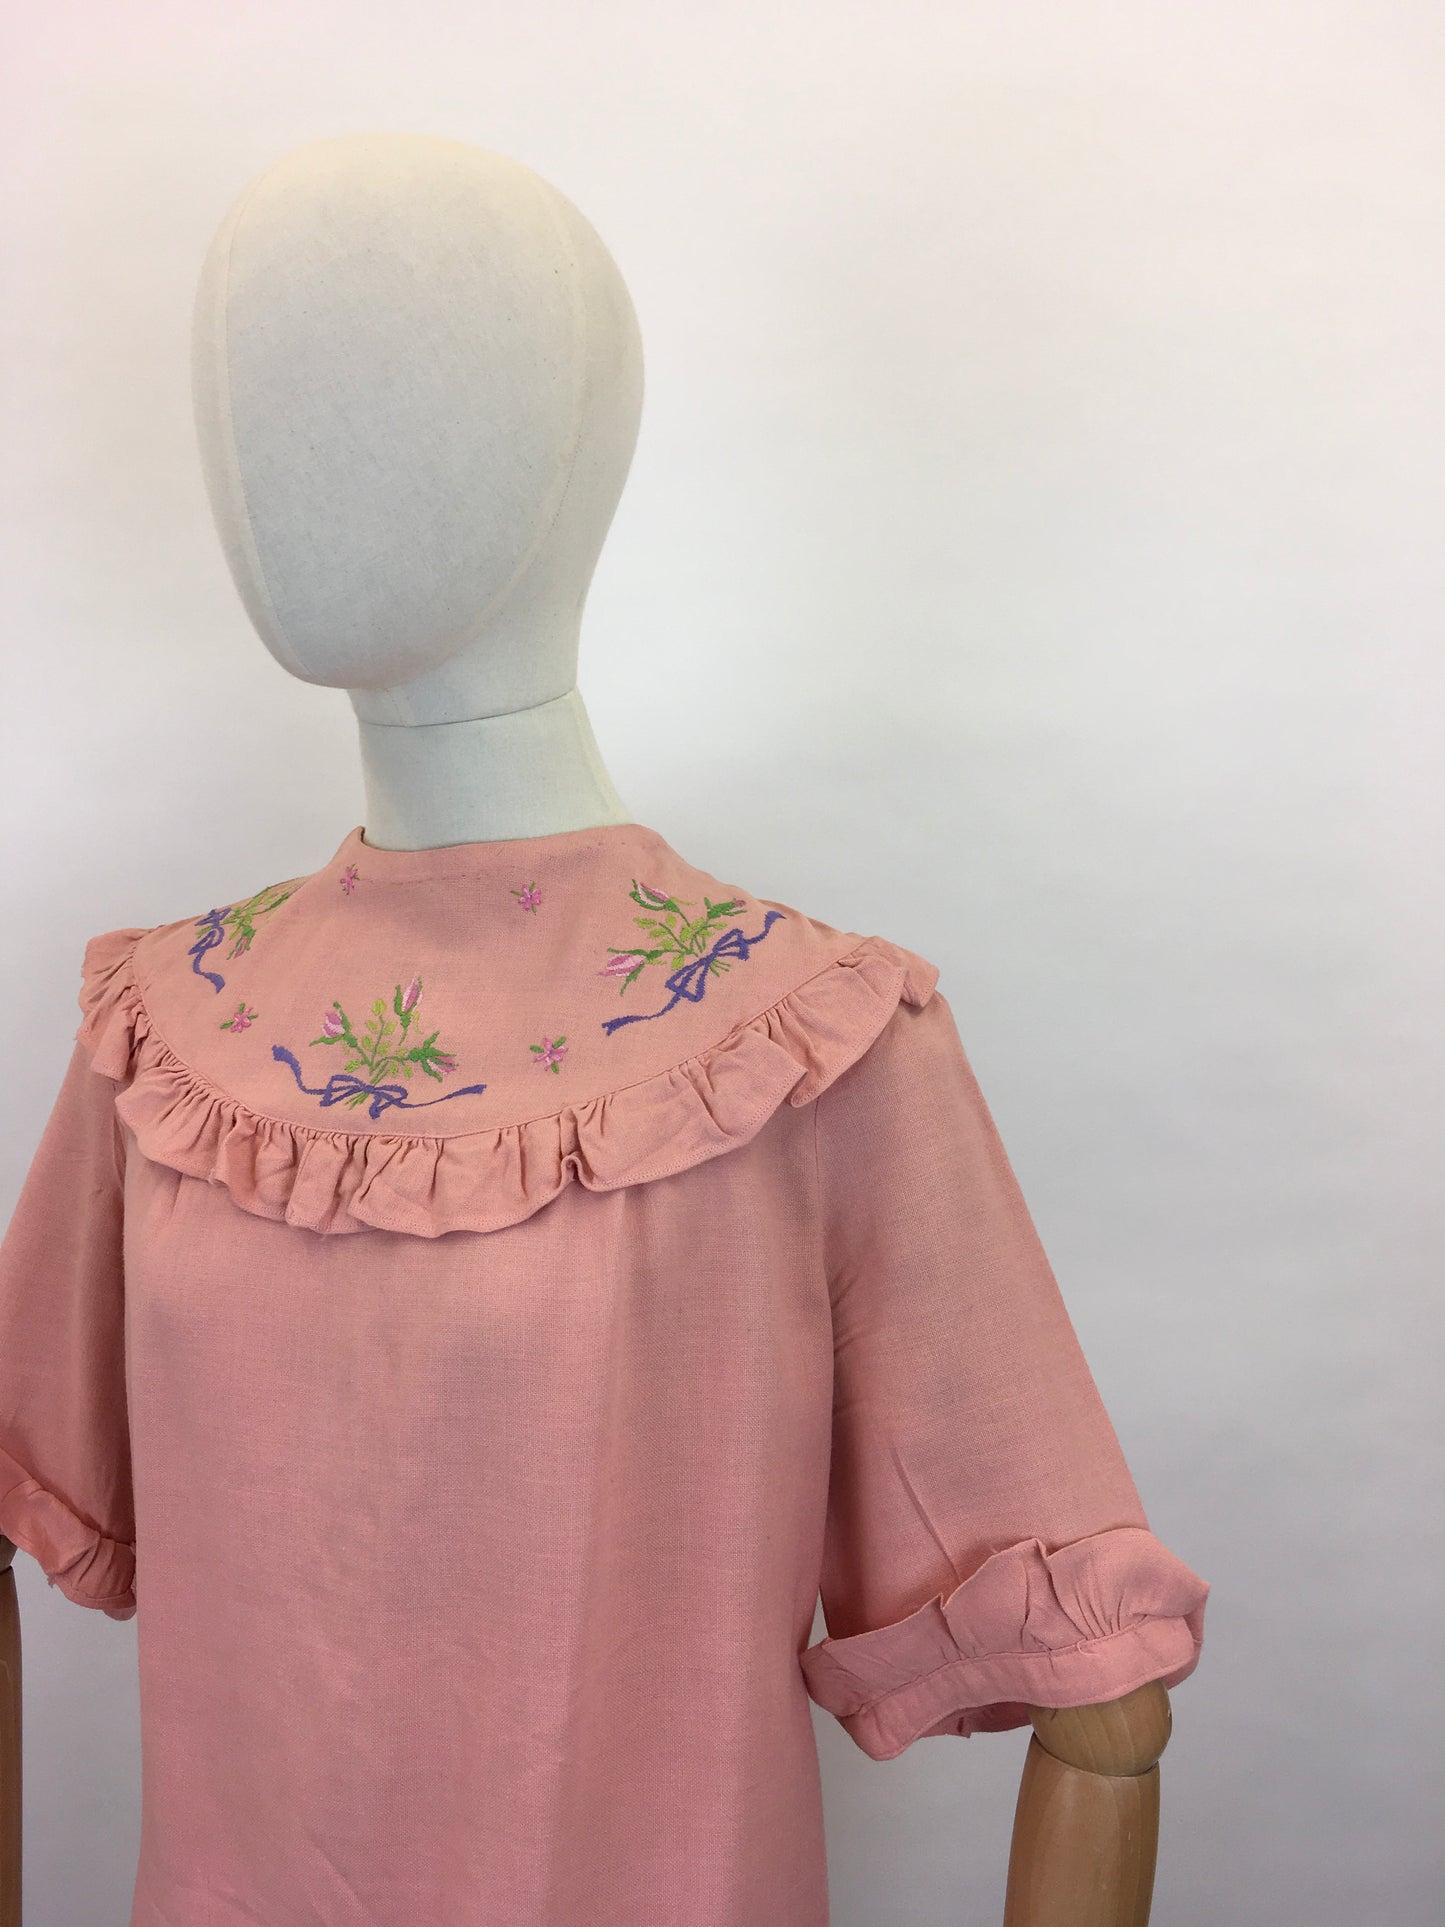 Original 1940s Linen Blouse - In A Beautiful Rose Pink with Floral Embroidery and Pleated Edge